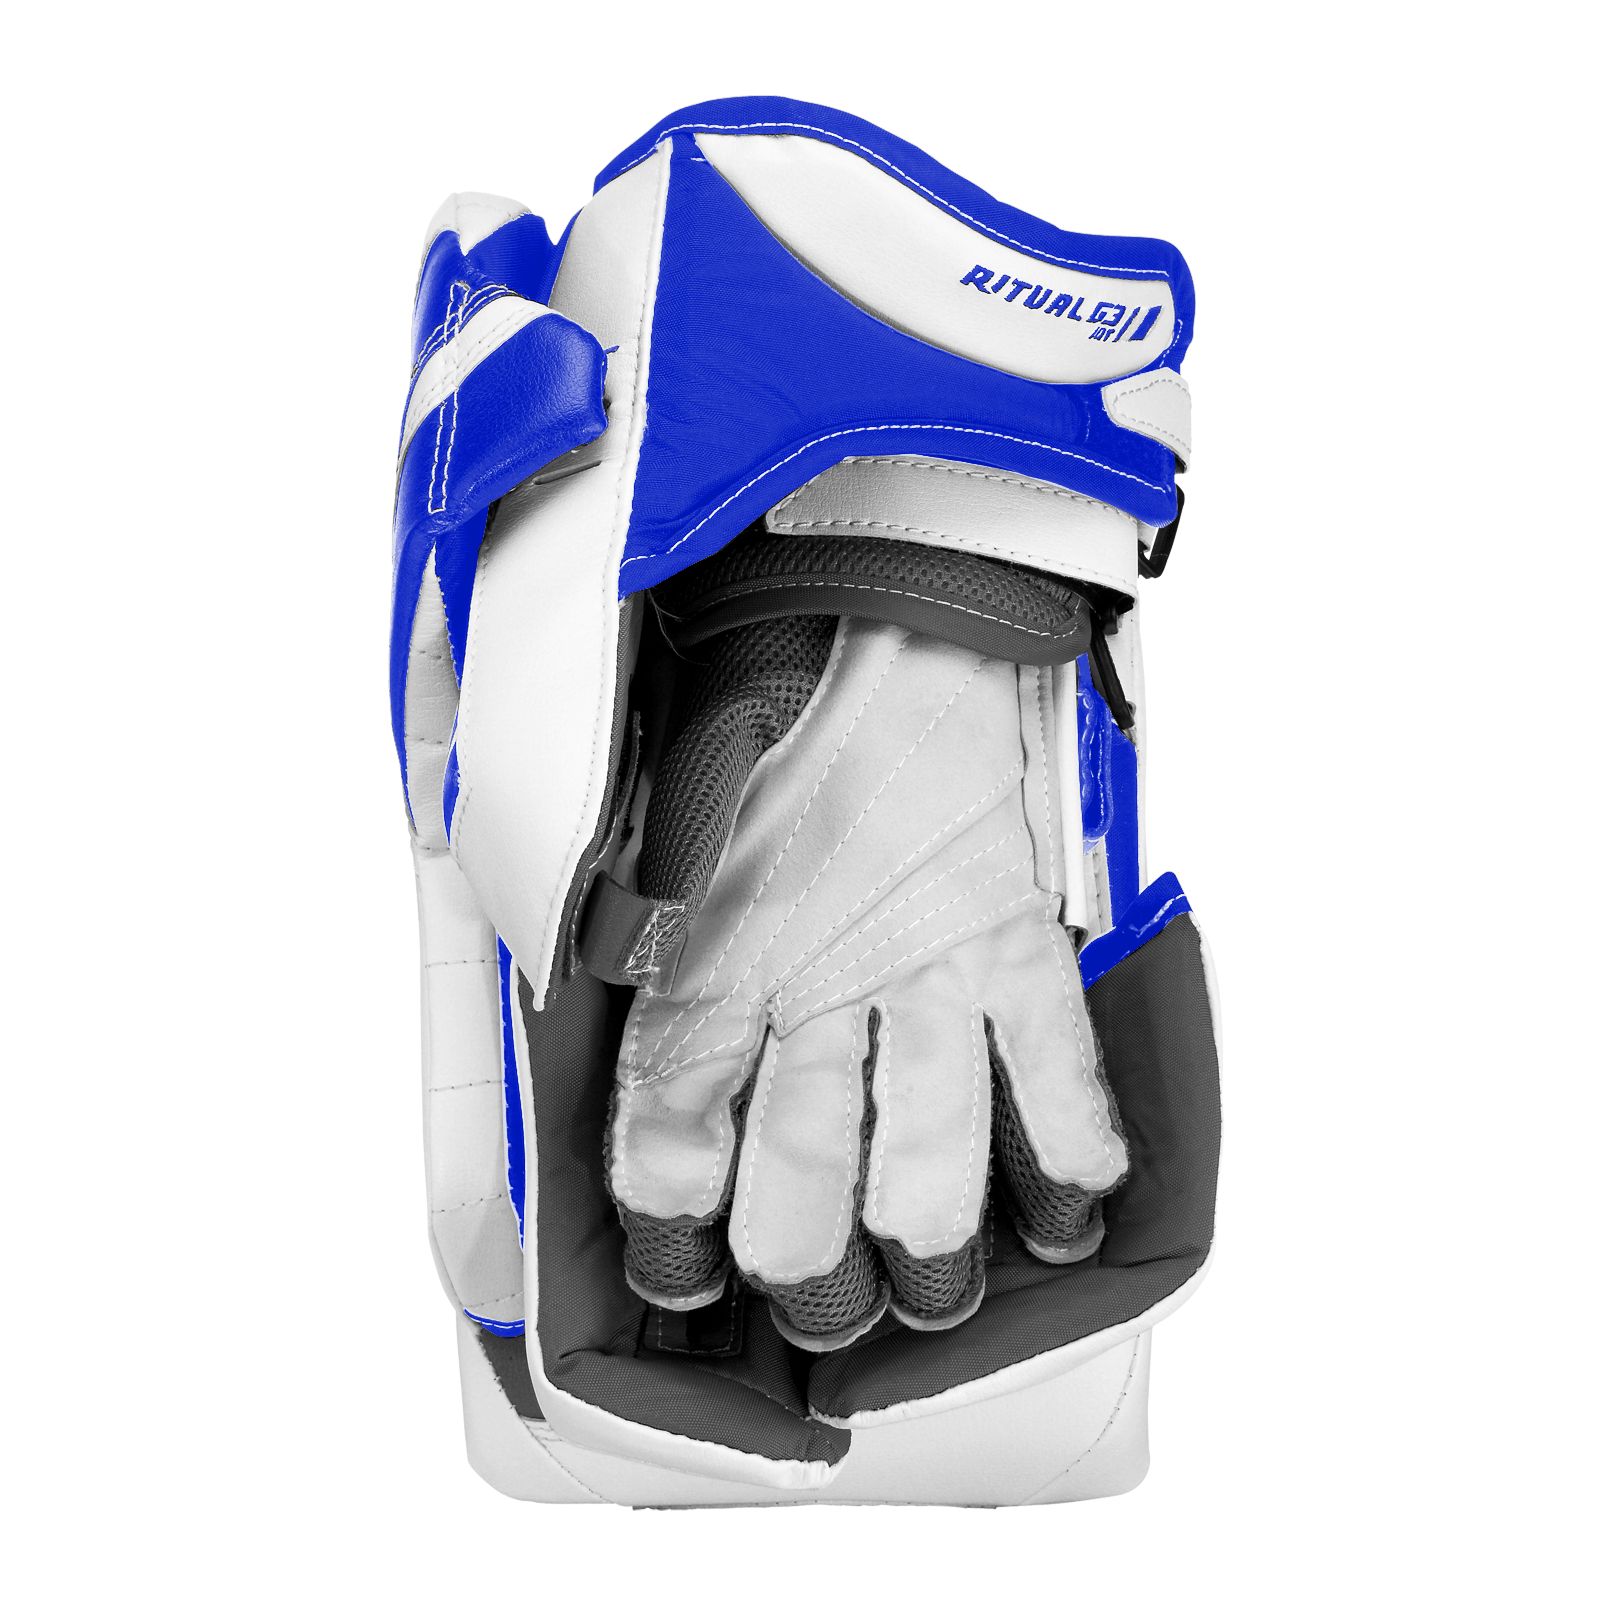 Ritual G3 Int. Blocker, White with Royal Blue image number 1